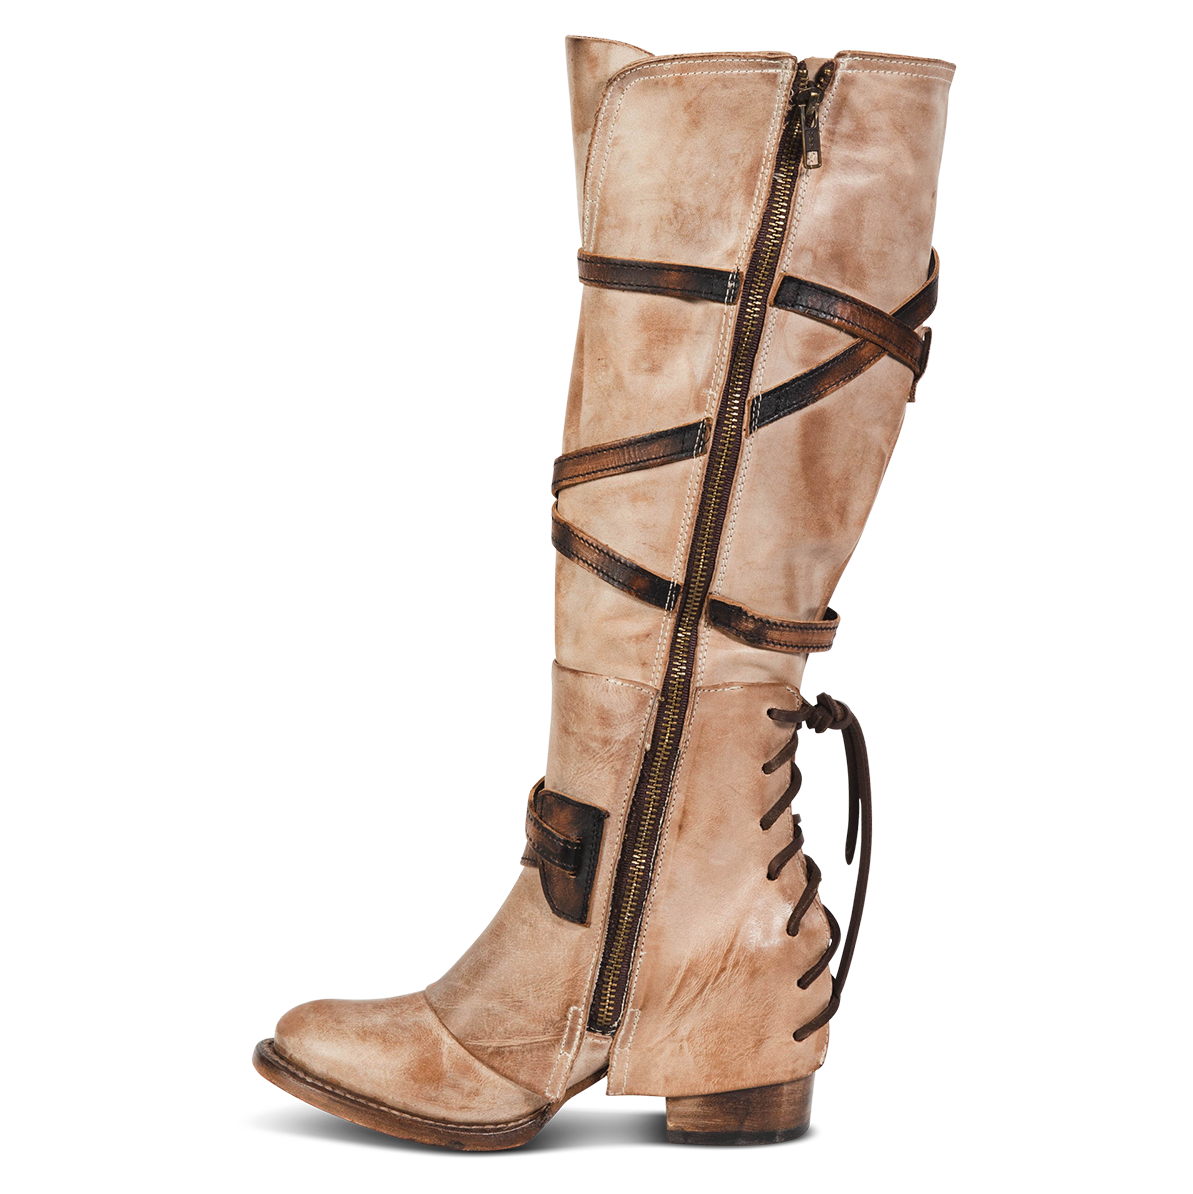 Inside view showing working brass zip closure and leather shaft straps on FREEBIRD women's Cassius beige multi tall leather boot